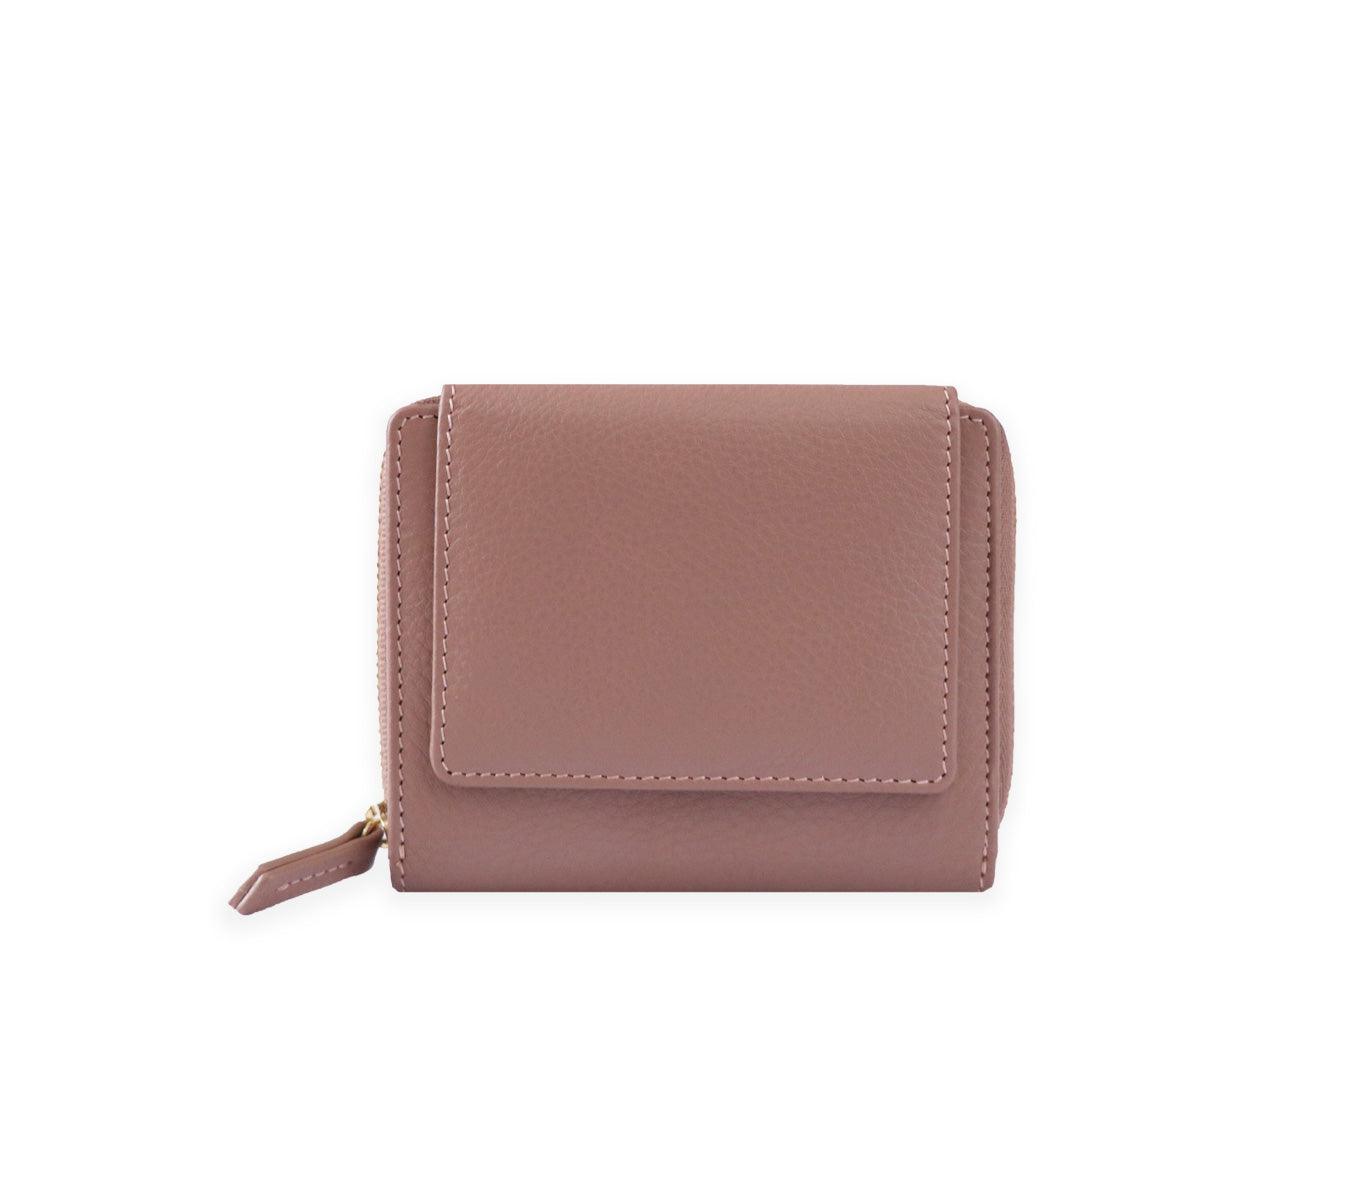 Cards Holders | Coin Pocket | Money Purse | Wallets - Genuine Leather  Multifunctional Women - Aliexpress